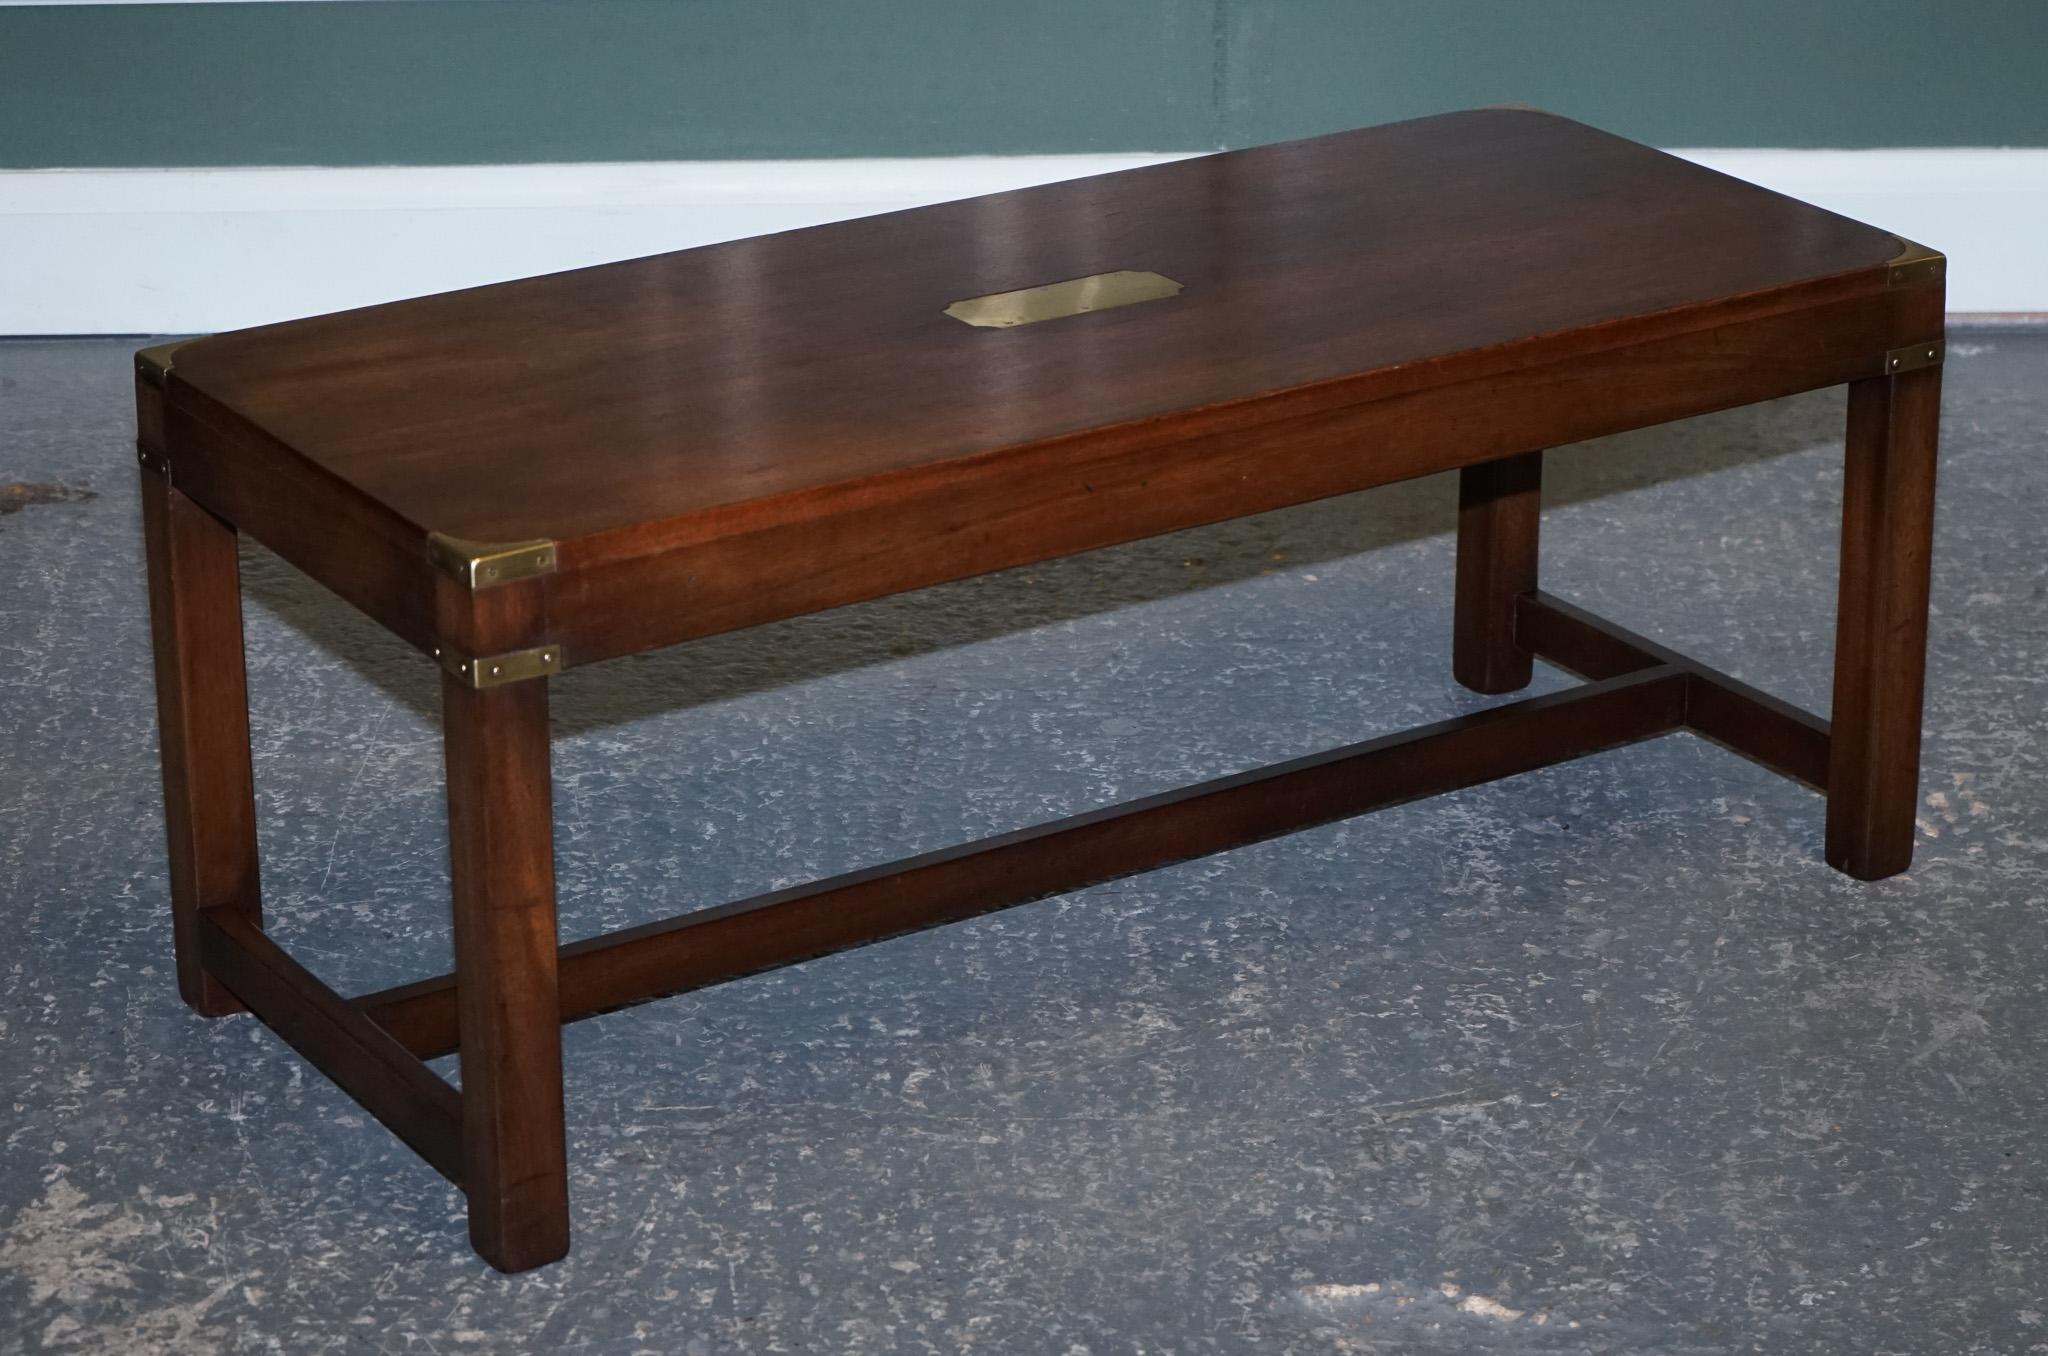 We are delighted to offer this vintage Harrods London Kennedy Military Campaign coffee table. 

A good-looking well, made, and decorative coffee table, we have lightly restored it to include a deep clean hand-conditioned wax and polish.

It is